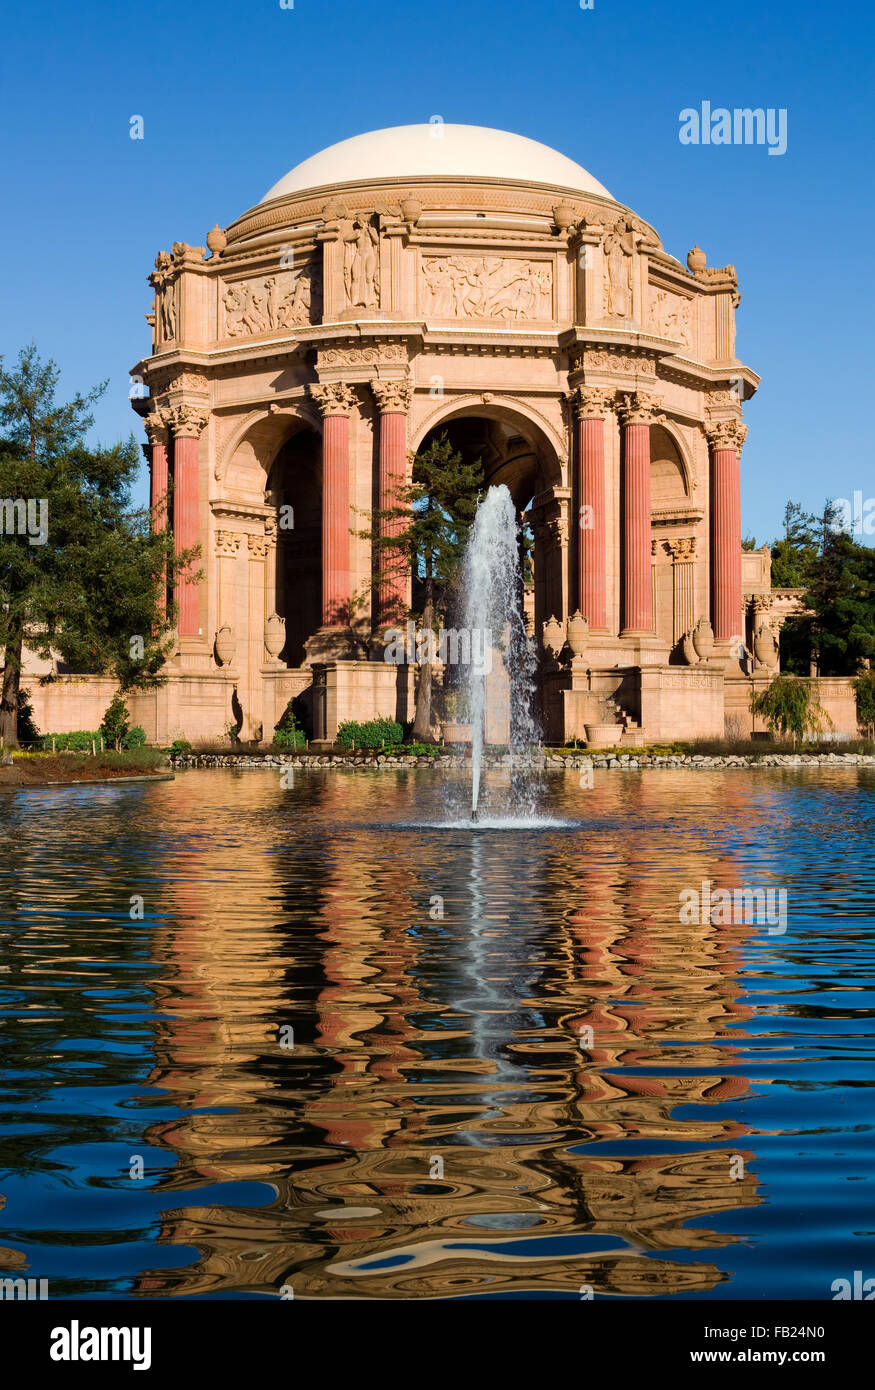 Palace of fine Arts in San Francisco Stock Photo